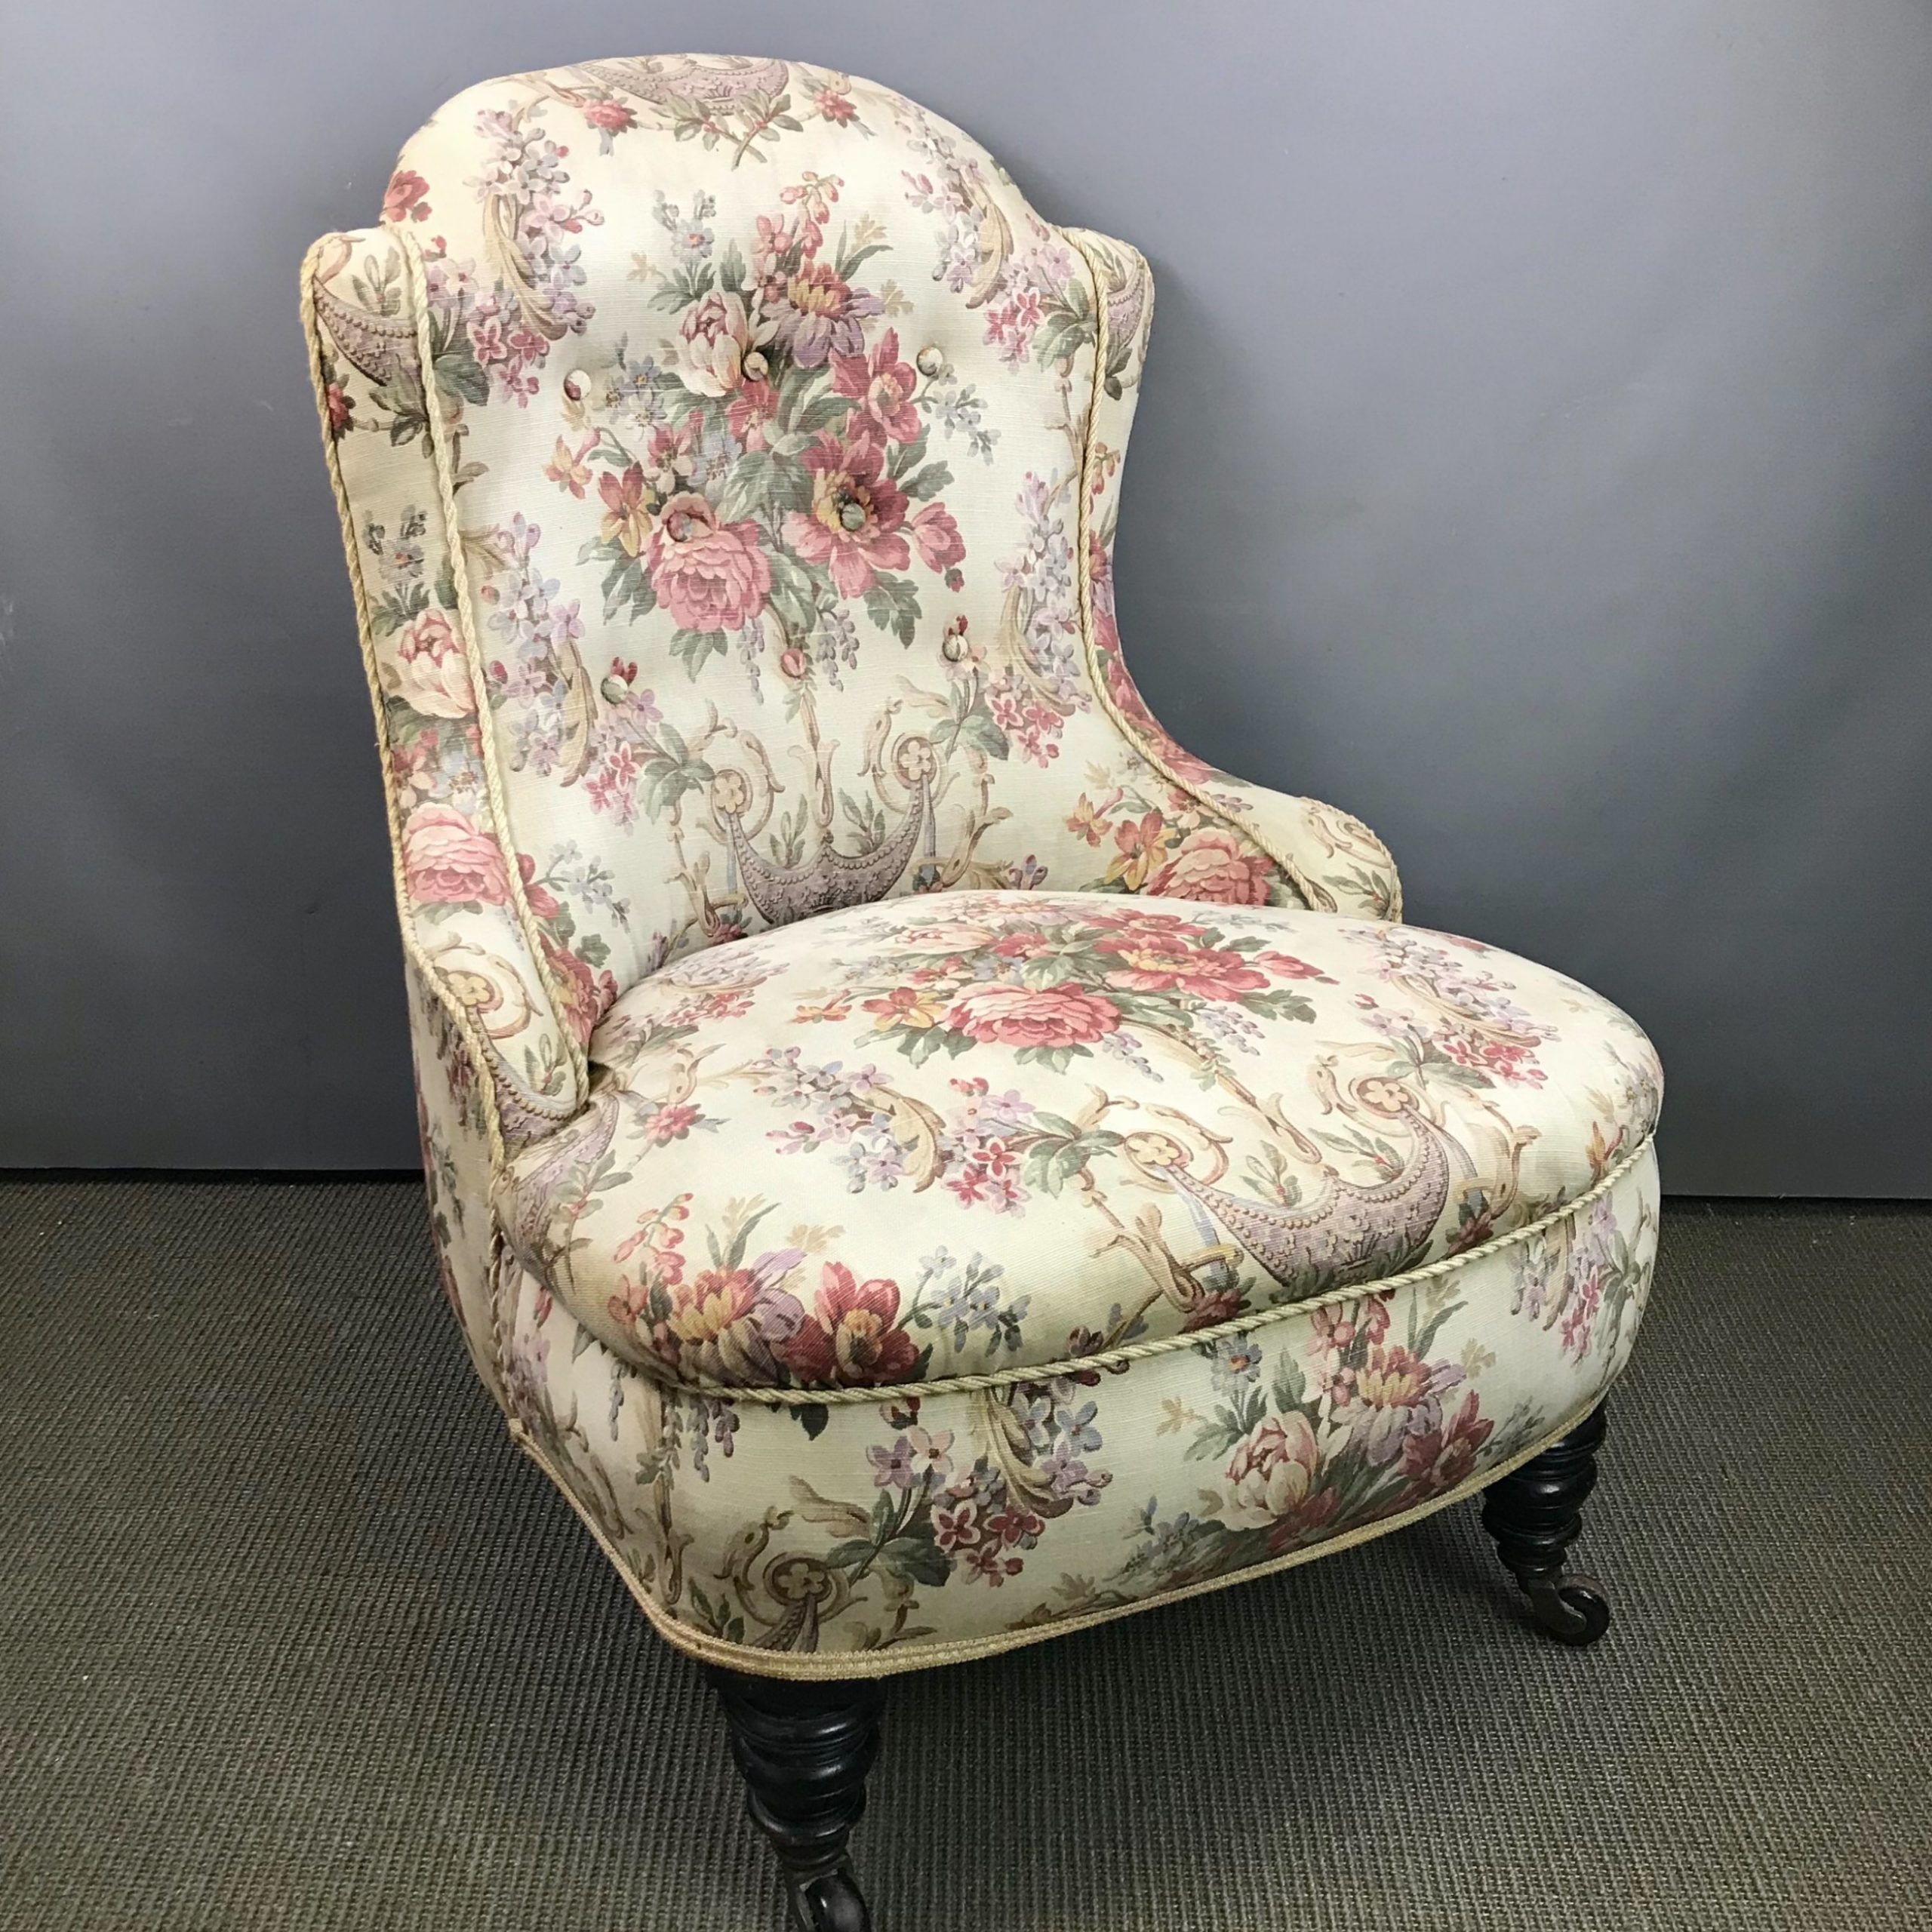 Victorian Chintz Bedroom / Cocktail Chair | 558194 Pertaining To Chintz Sofas And Chairs (View 9 of 15)